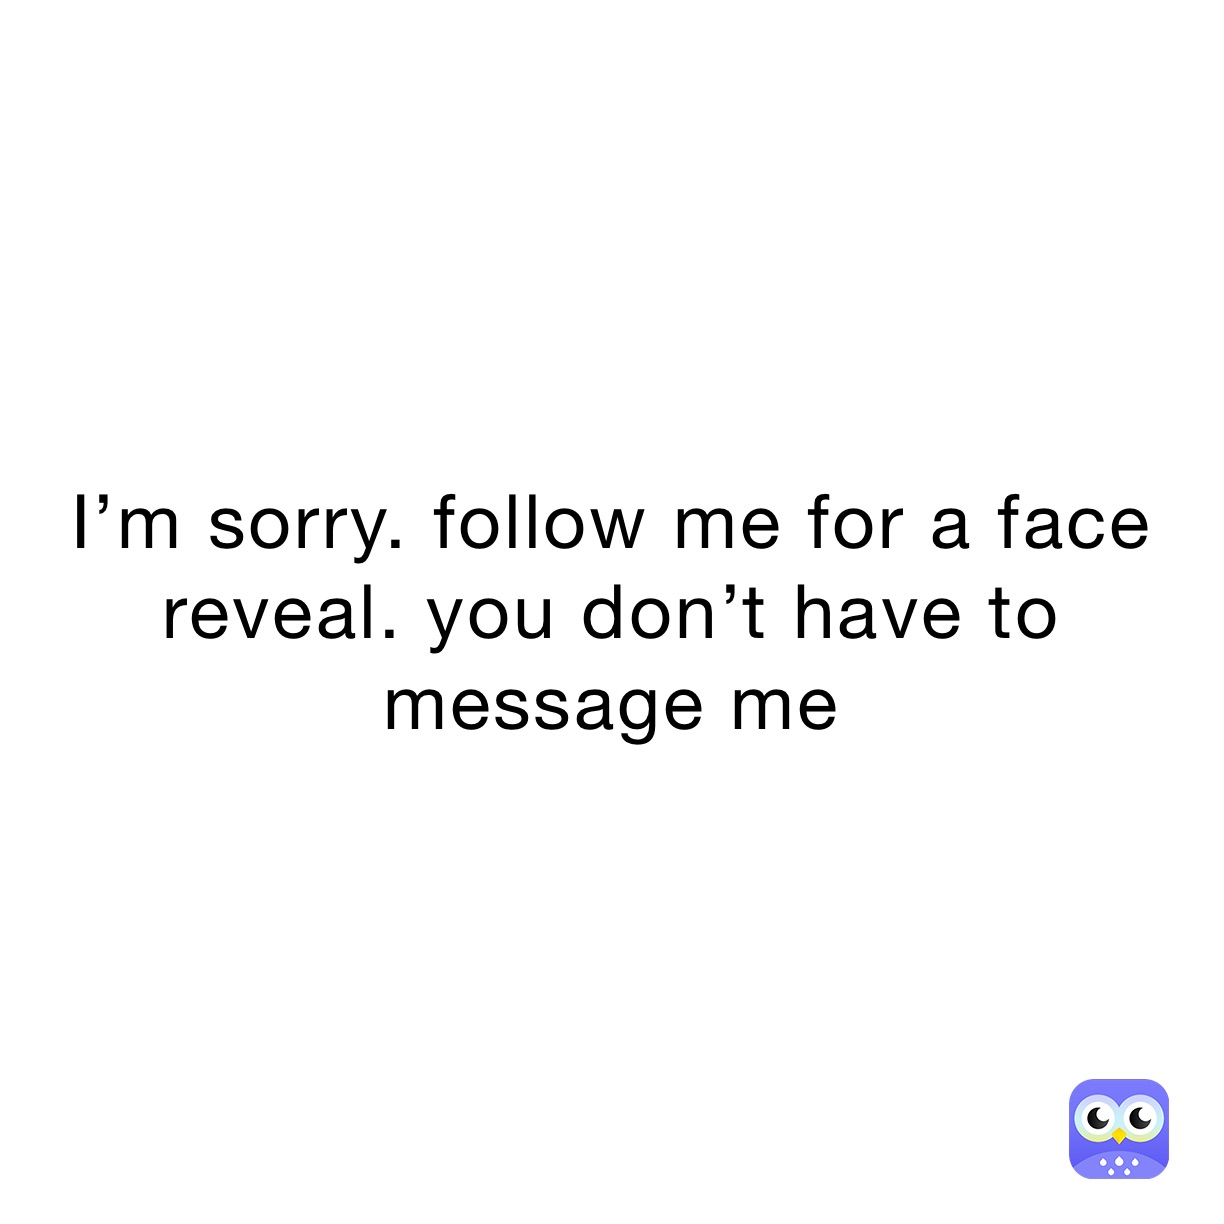 I’m sorry. follow me for a face reveal. you don’t have to message me 